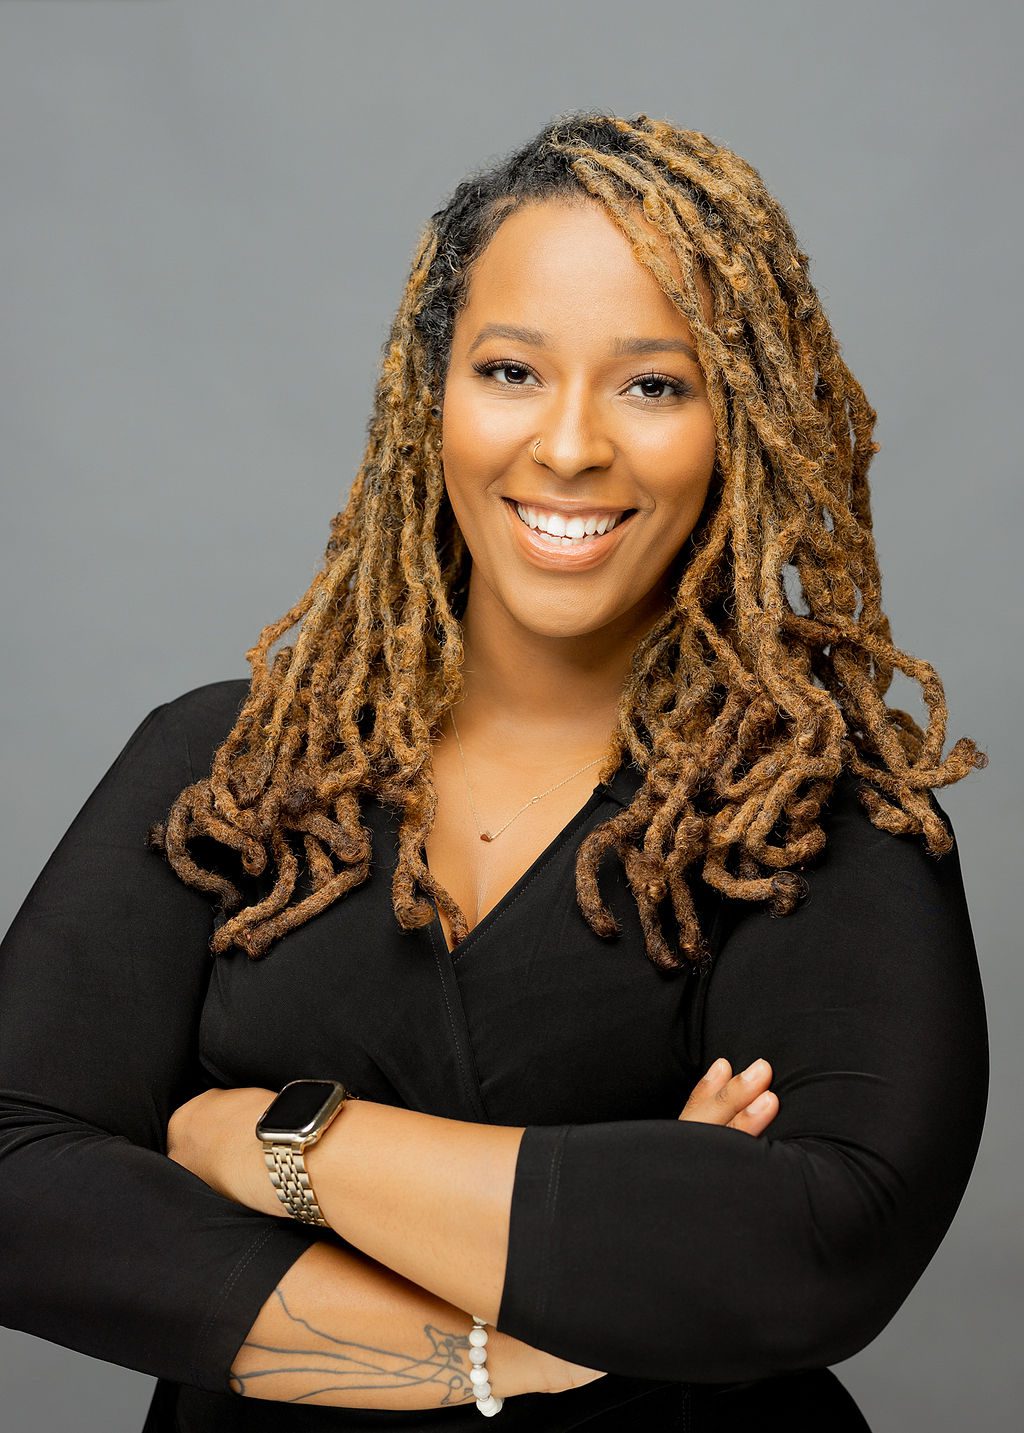 This photo is a professional headshot of Tyesha Thomas. She is a Black woman with long, curly light brown locs. She is wearing a medium-sleeved black blouse, a thin silver chain with a small red gem at the end, a gold smartwatch on one wrist, and a white beaded bracelet on the other. She is smiling with her arms crossed confidently.